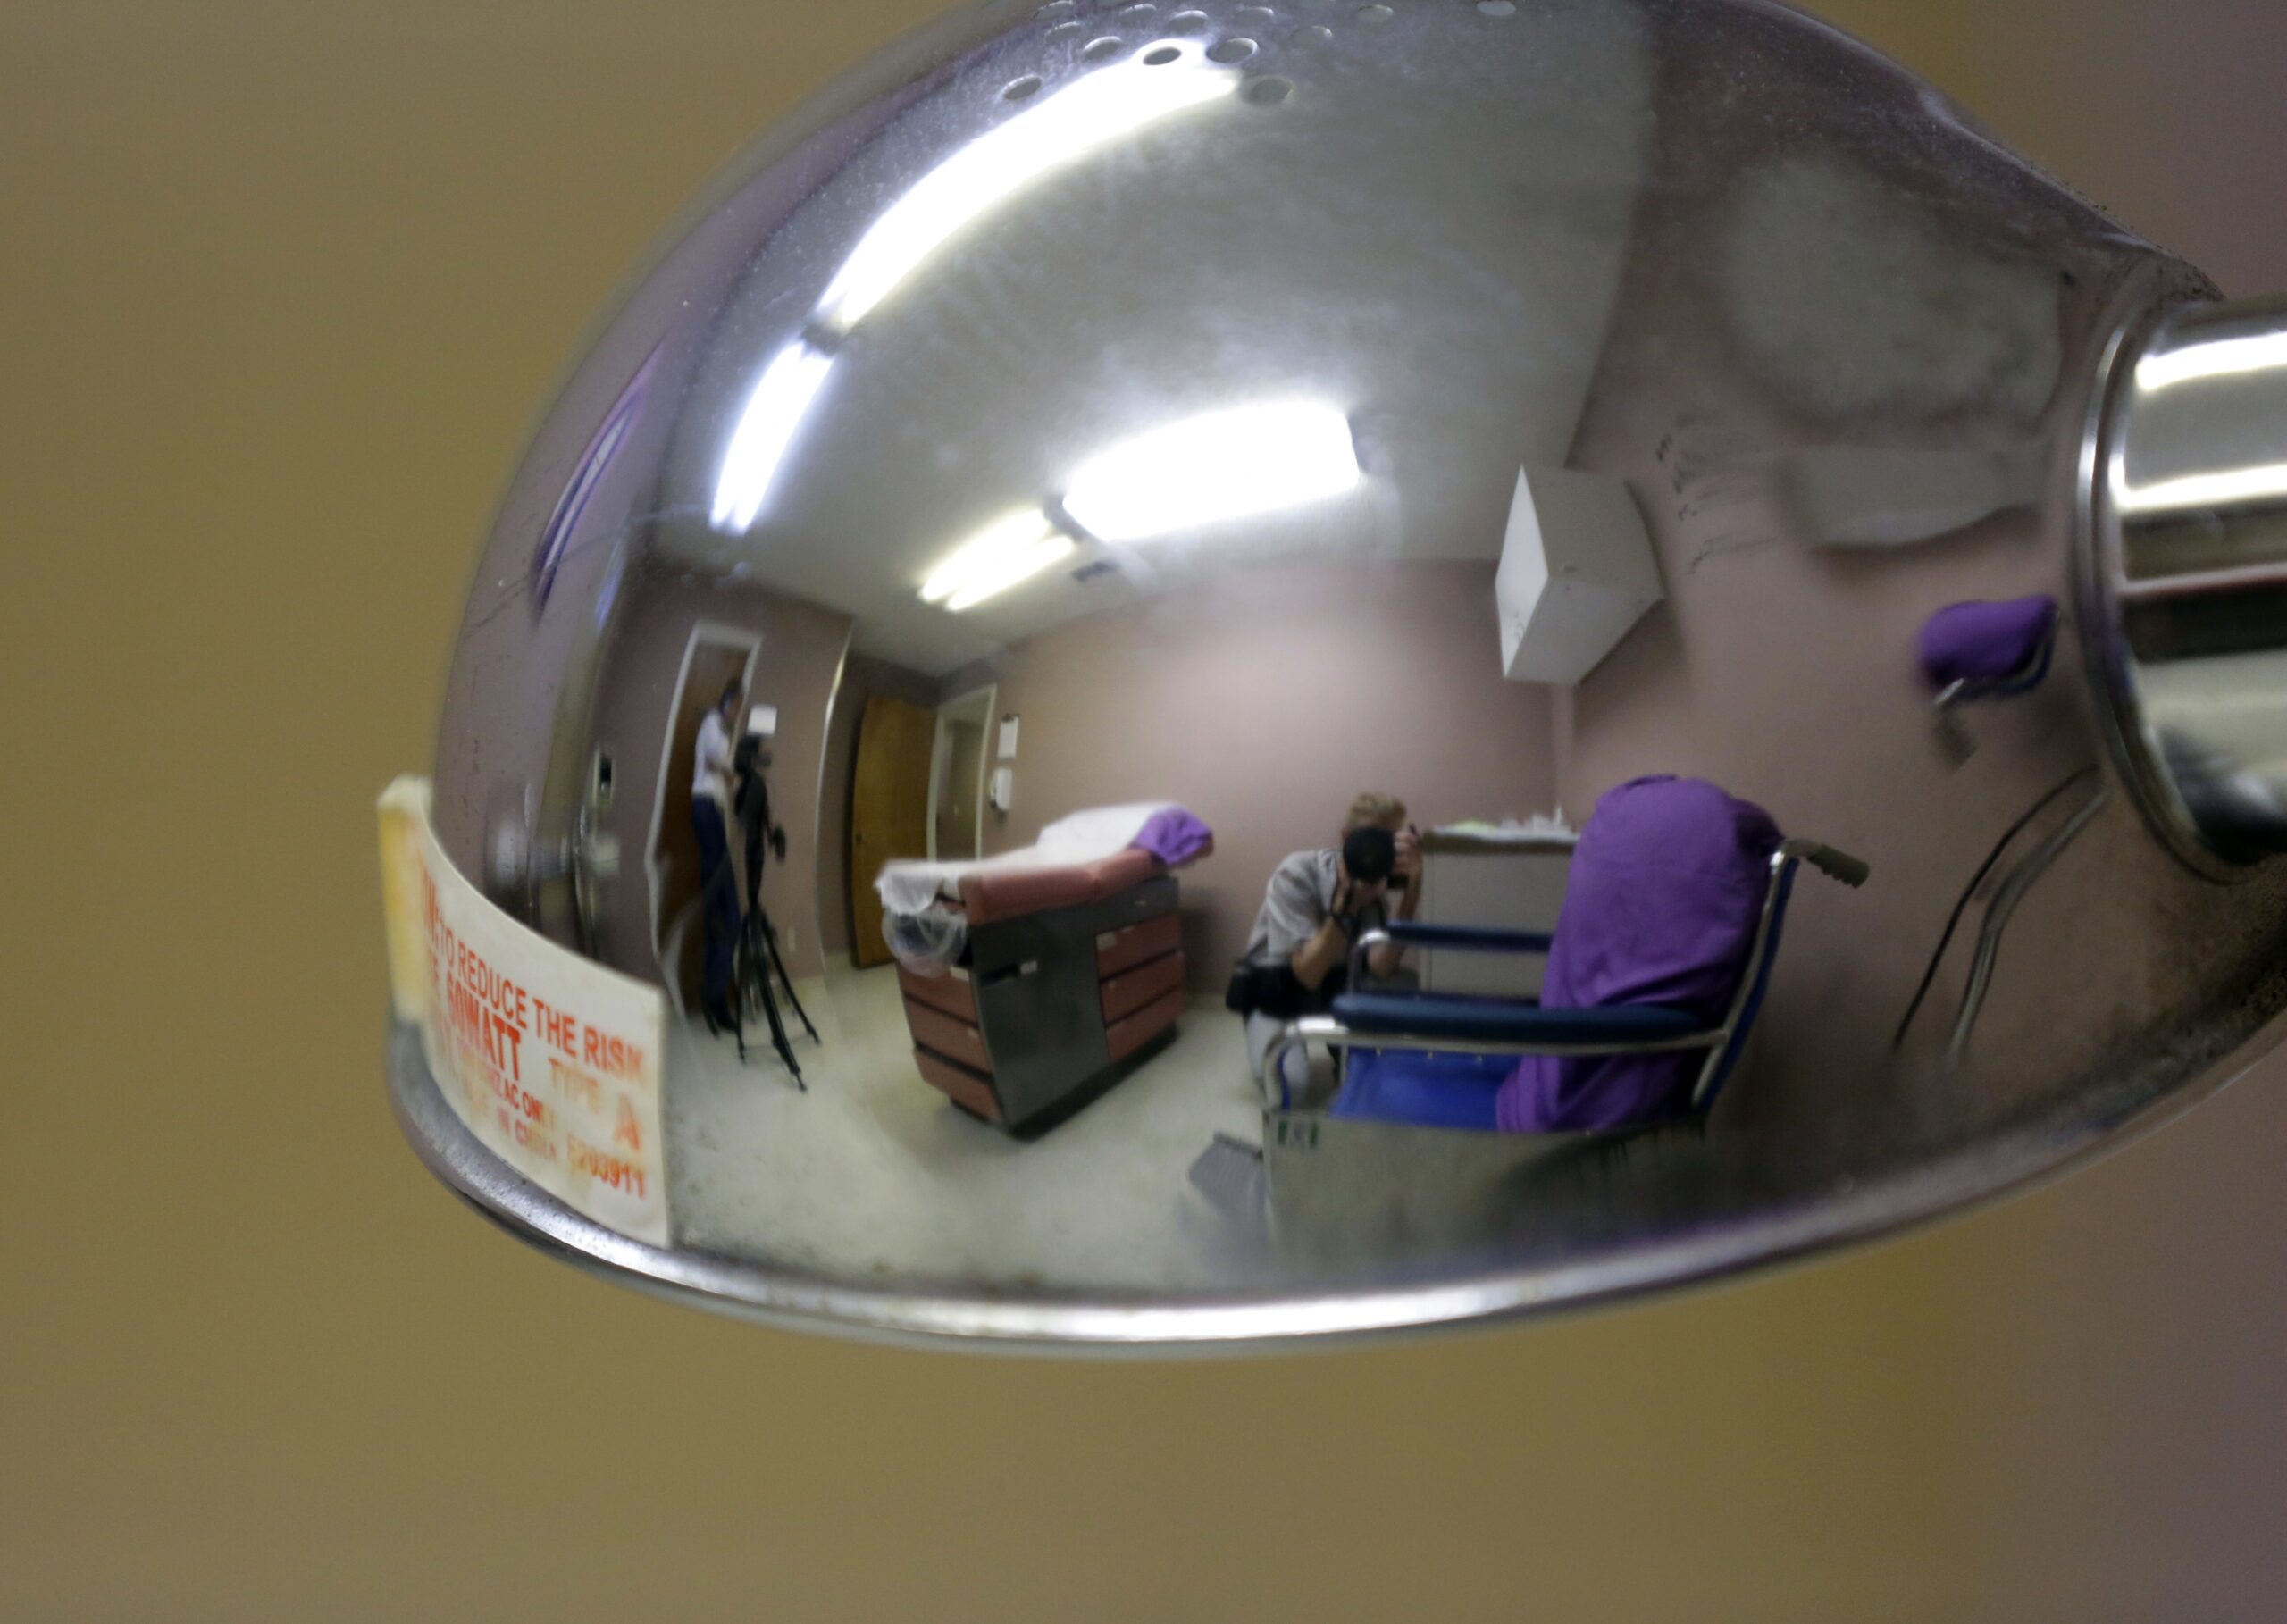 media are reflected in a lamp as they photograph a room formally used as an examination room for abortions